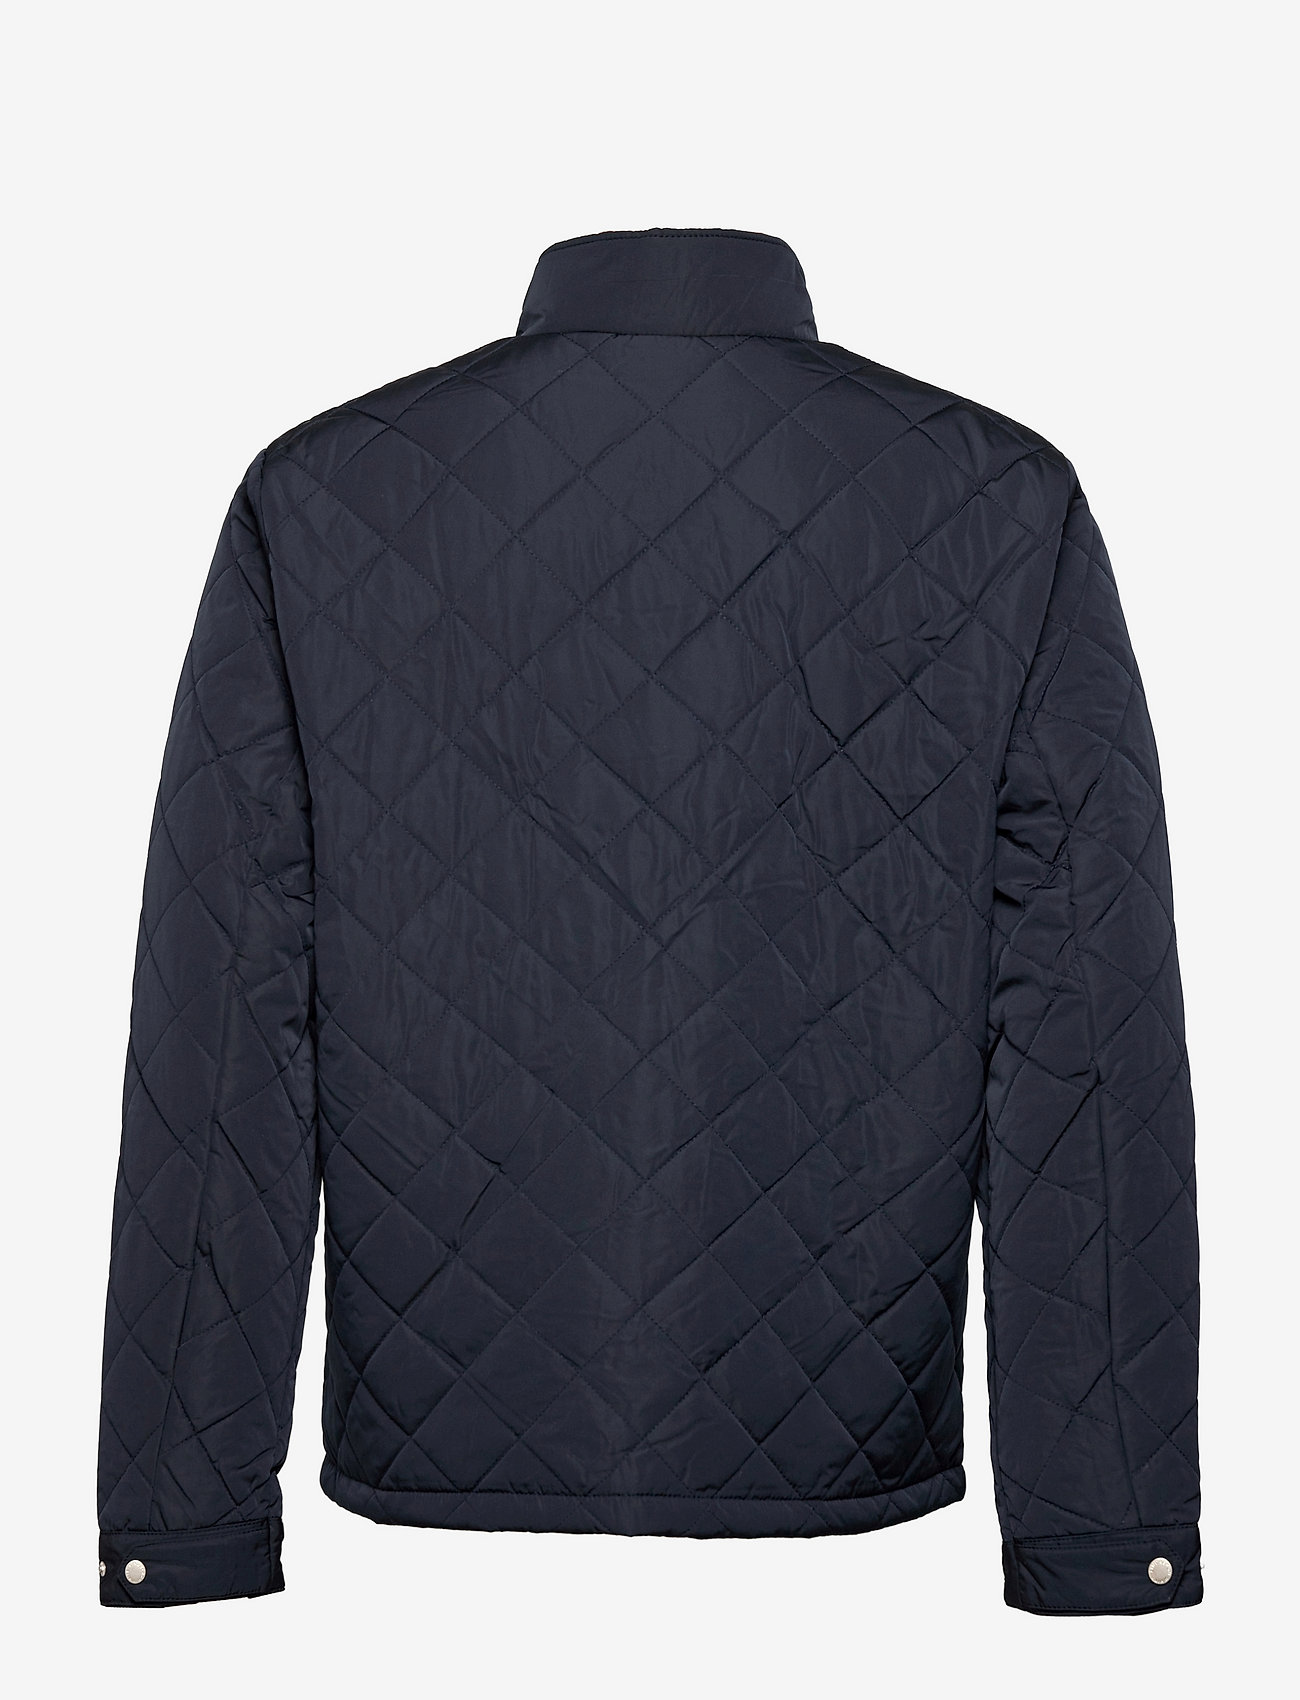 Lindbergh - Quilted jacket - spring jackets - navy - 1